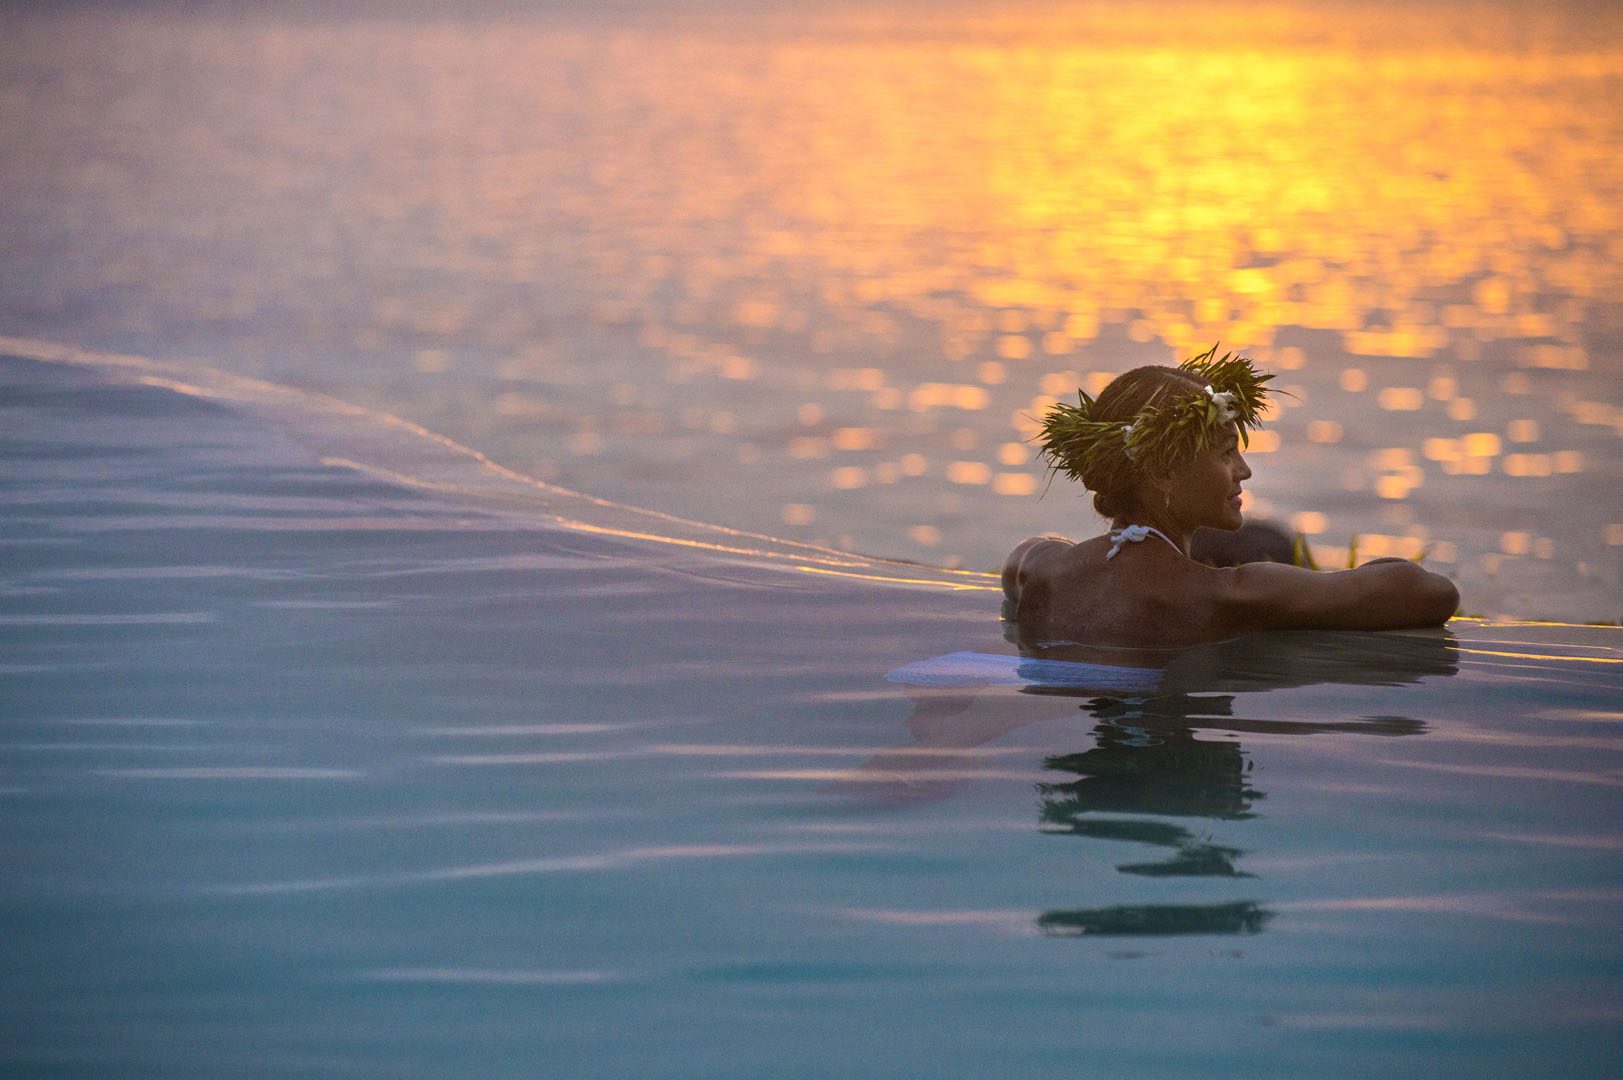 Guest in the pool, leans towards the edge to enjoy the serene sunset reflection on the lagoon as it goes down the horizon giving its last shade of yellow and orange